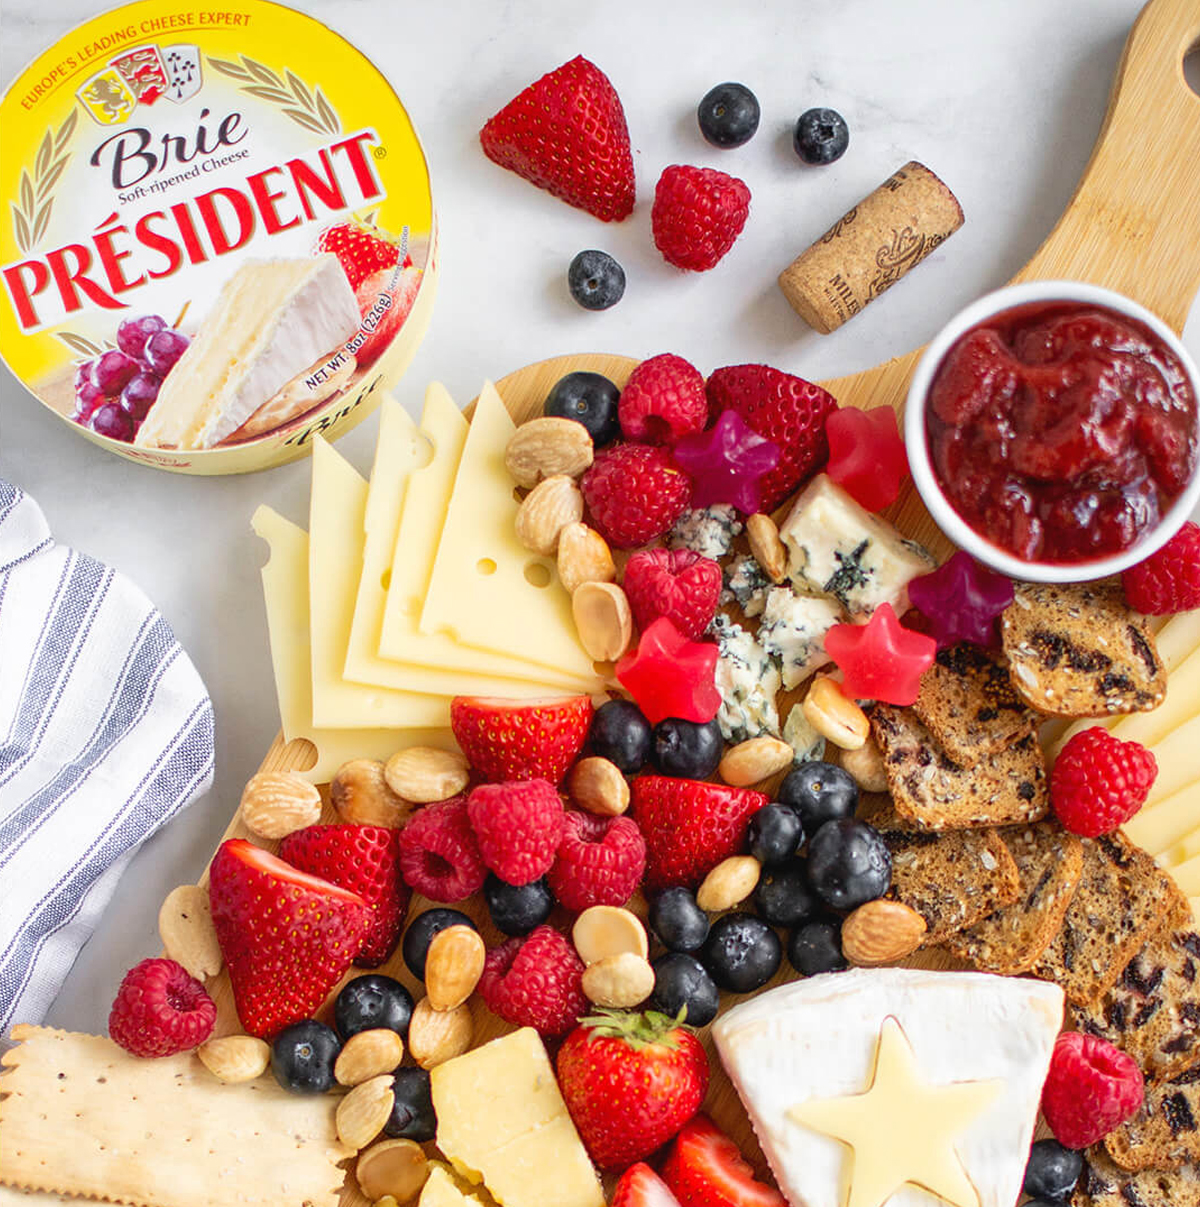 Brie cheese, jelly, berries, and crackers are included on President Cheese's Brie board.